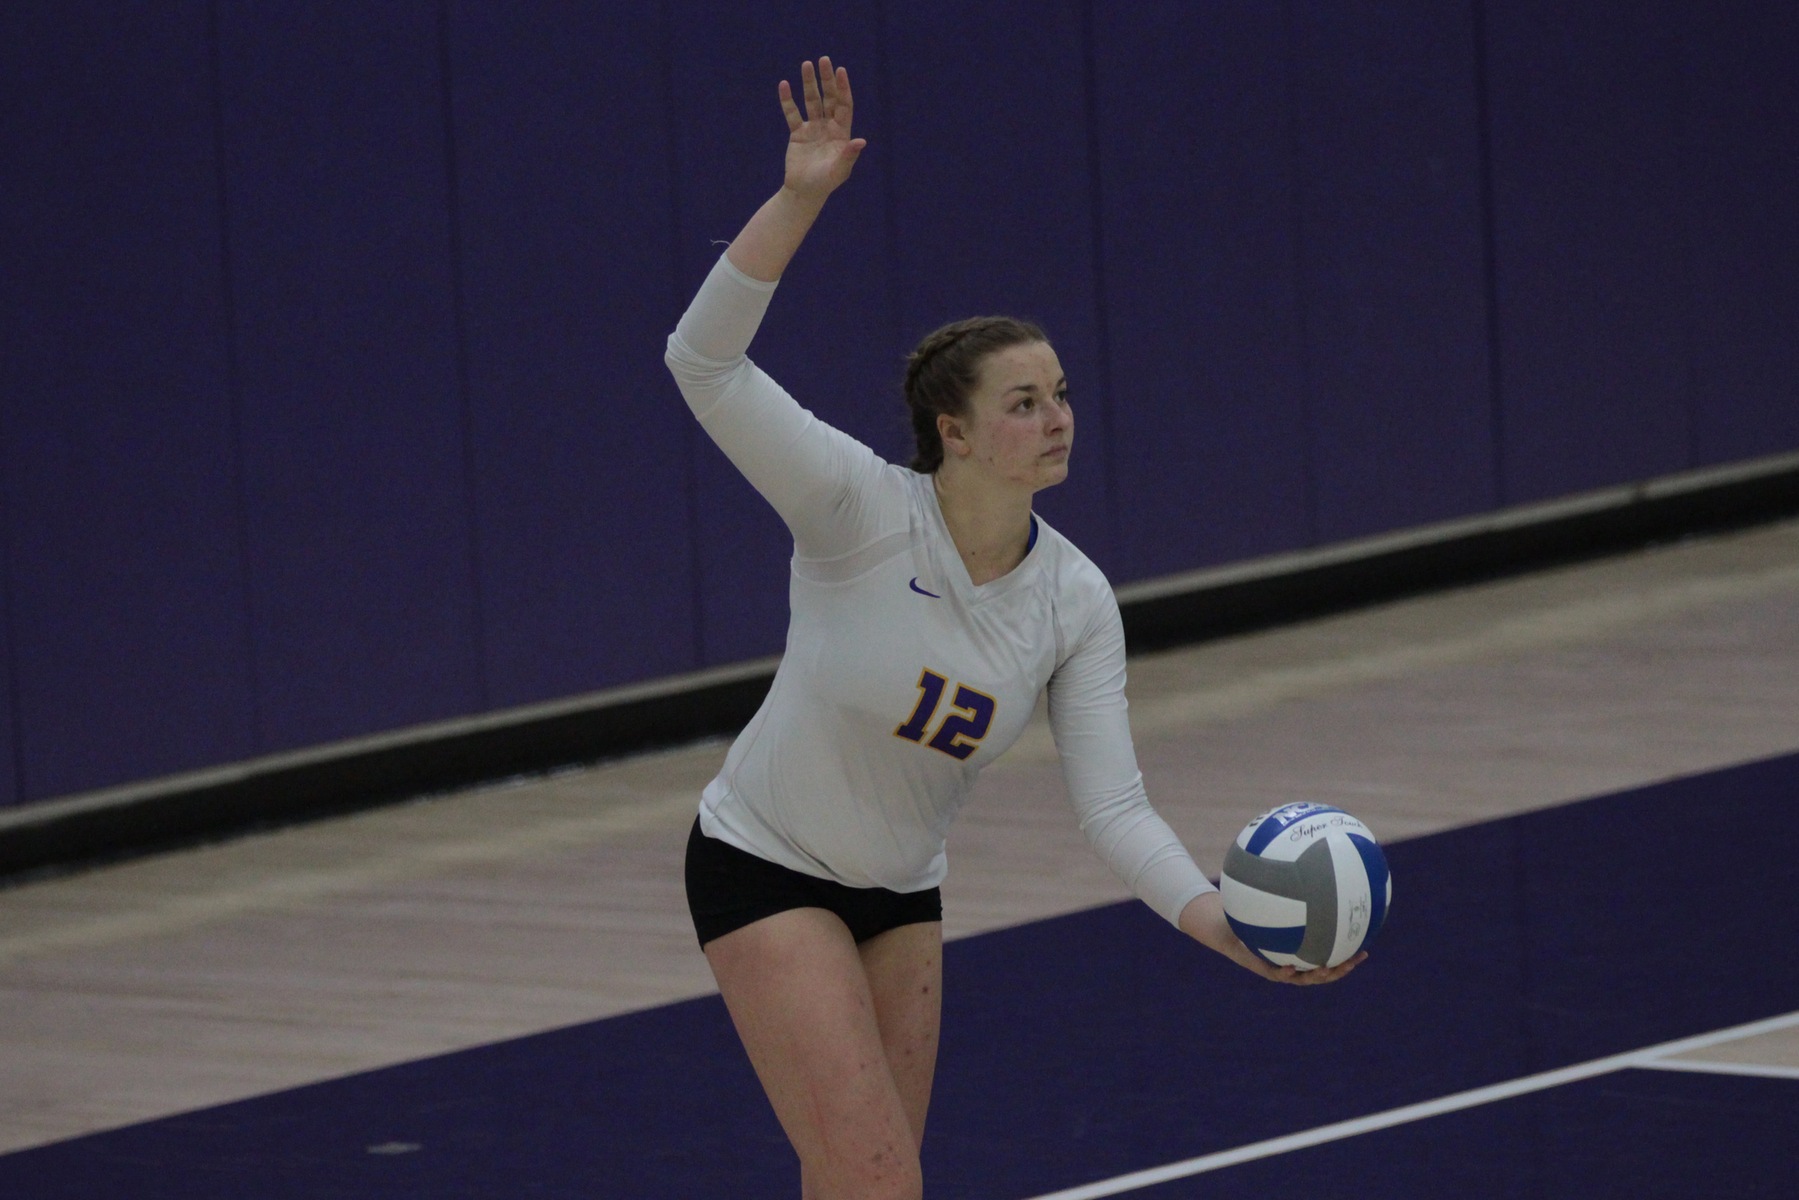 Jenny Kent served two aces, dished out 23 assists and recorded seven digs in the Regals 3-1 victory against Caltech.